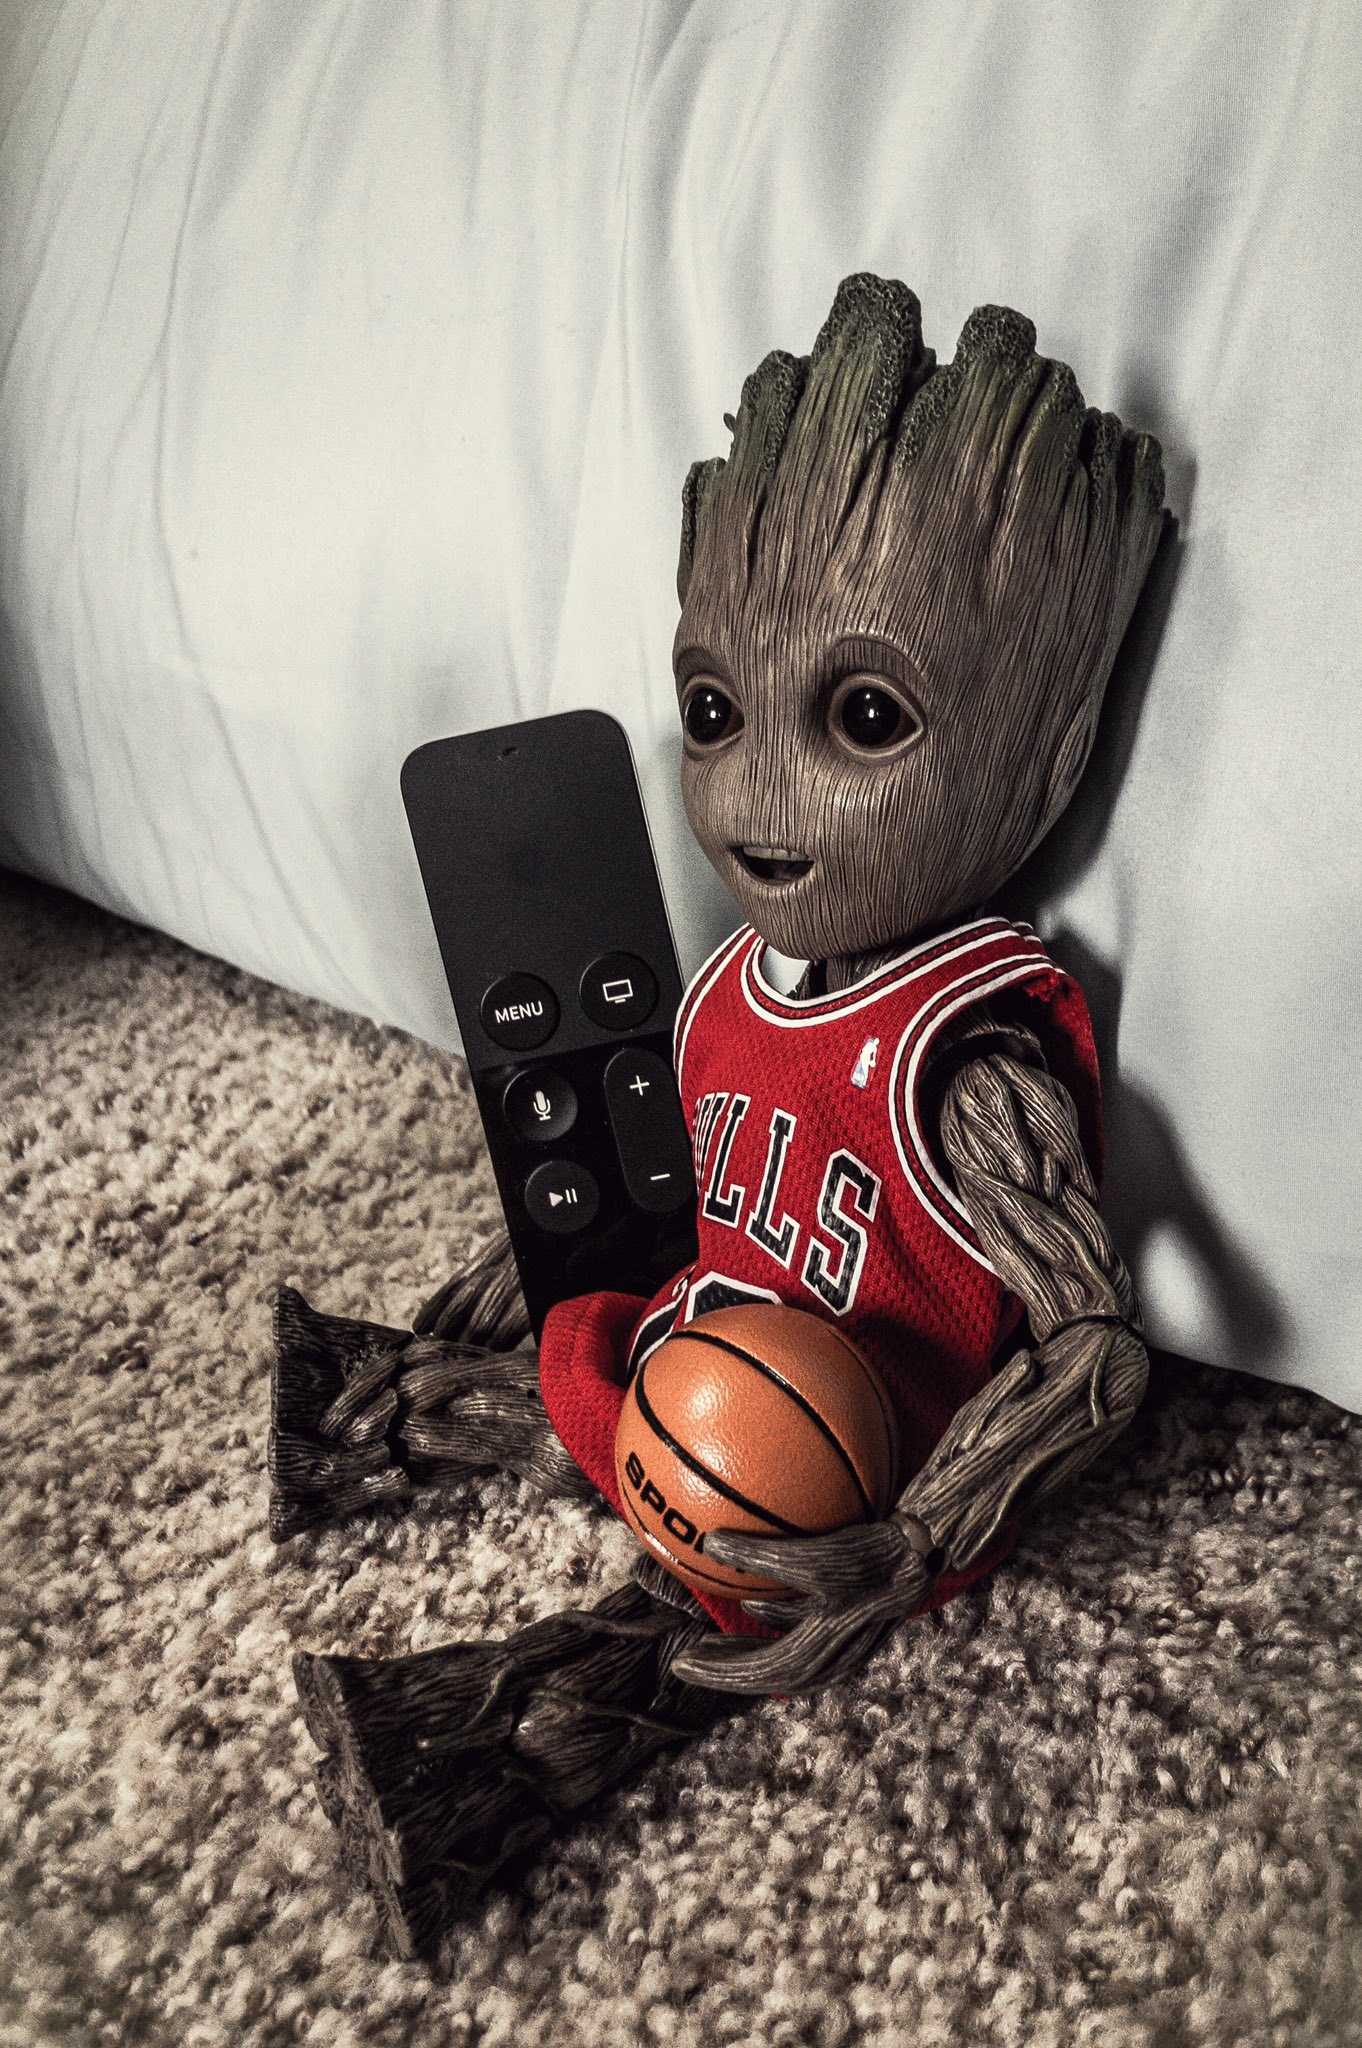 Baby Groot Basketball Wallpapers - Wallpaper Cave